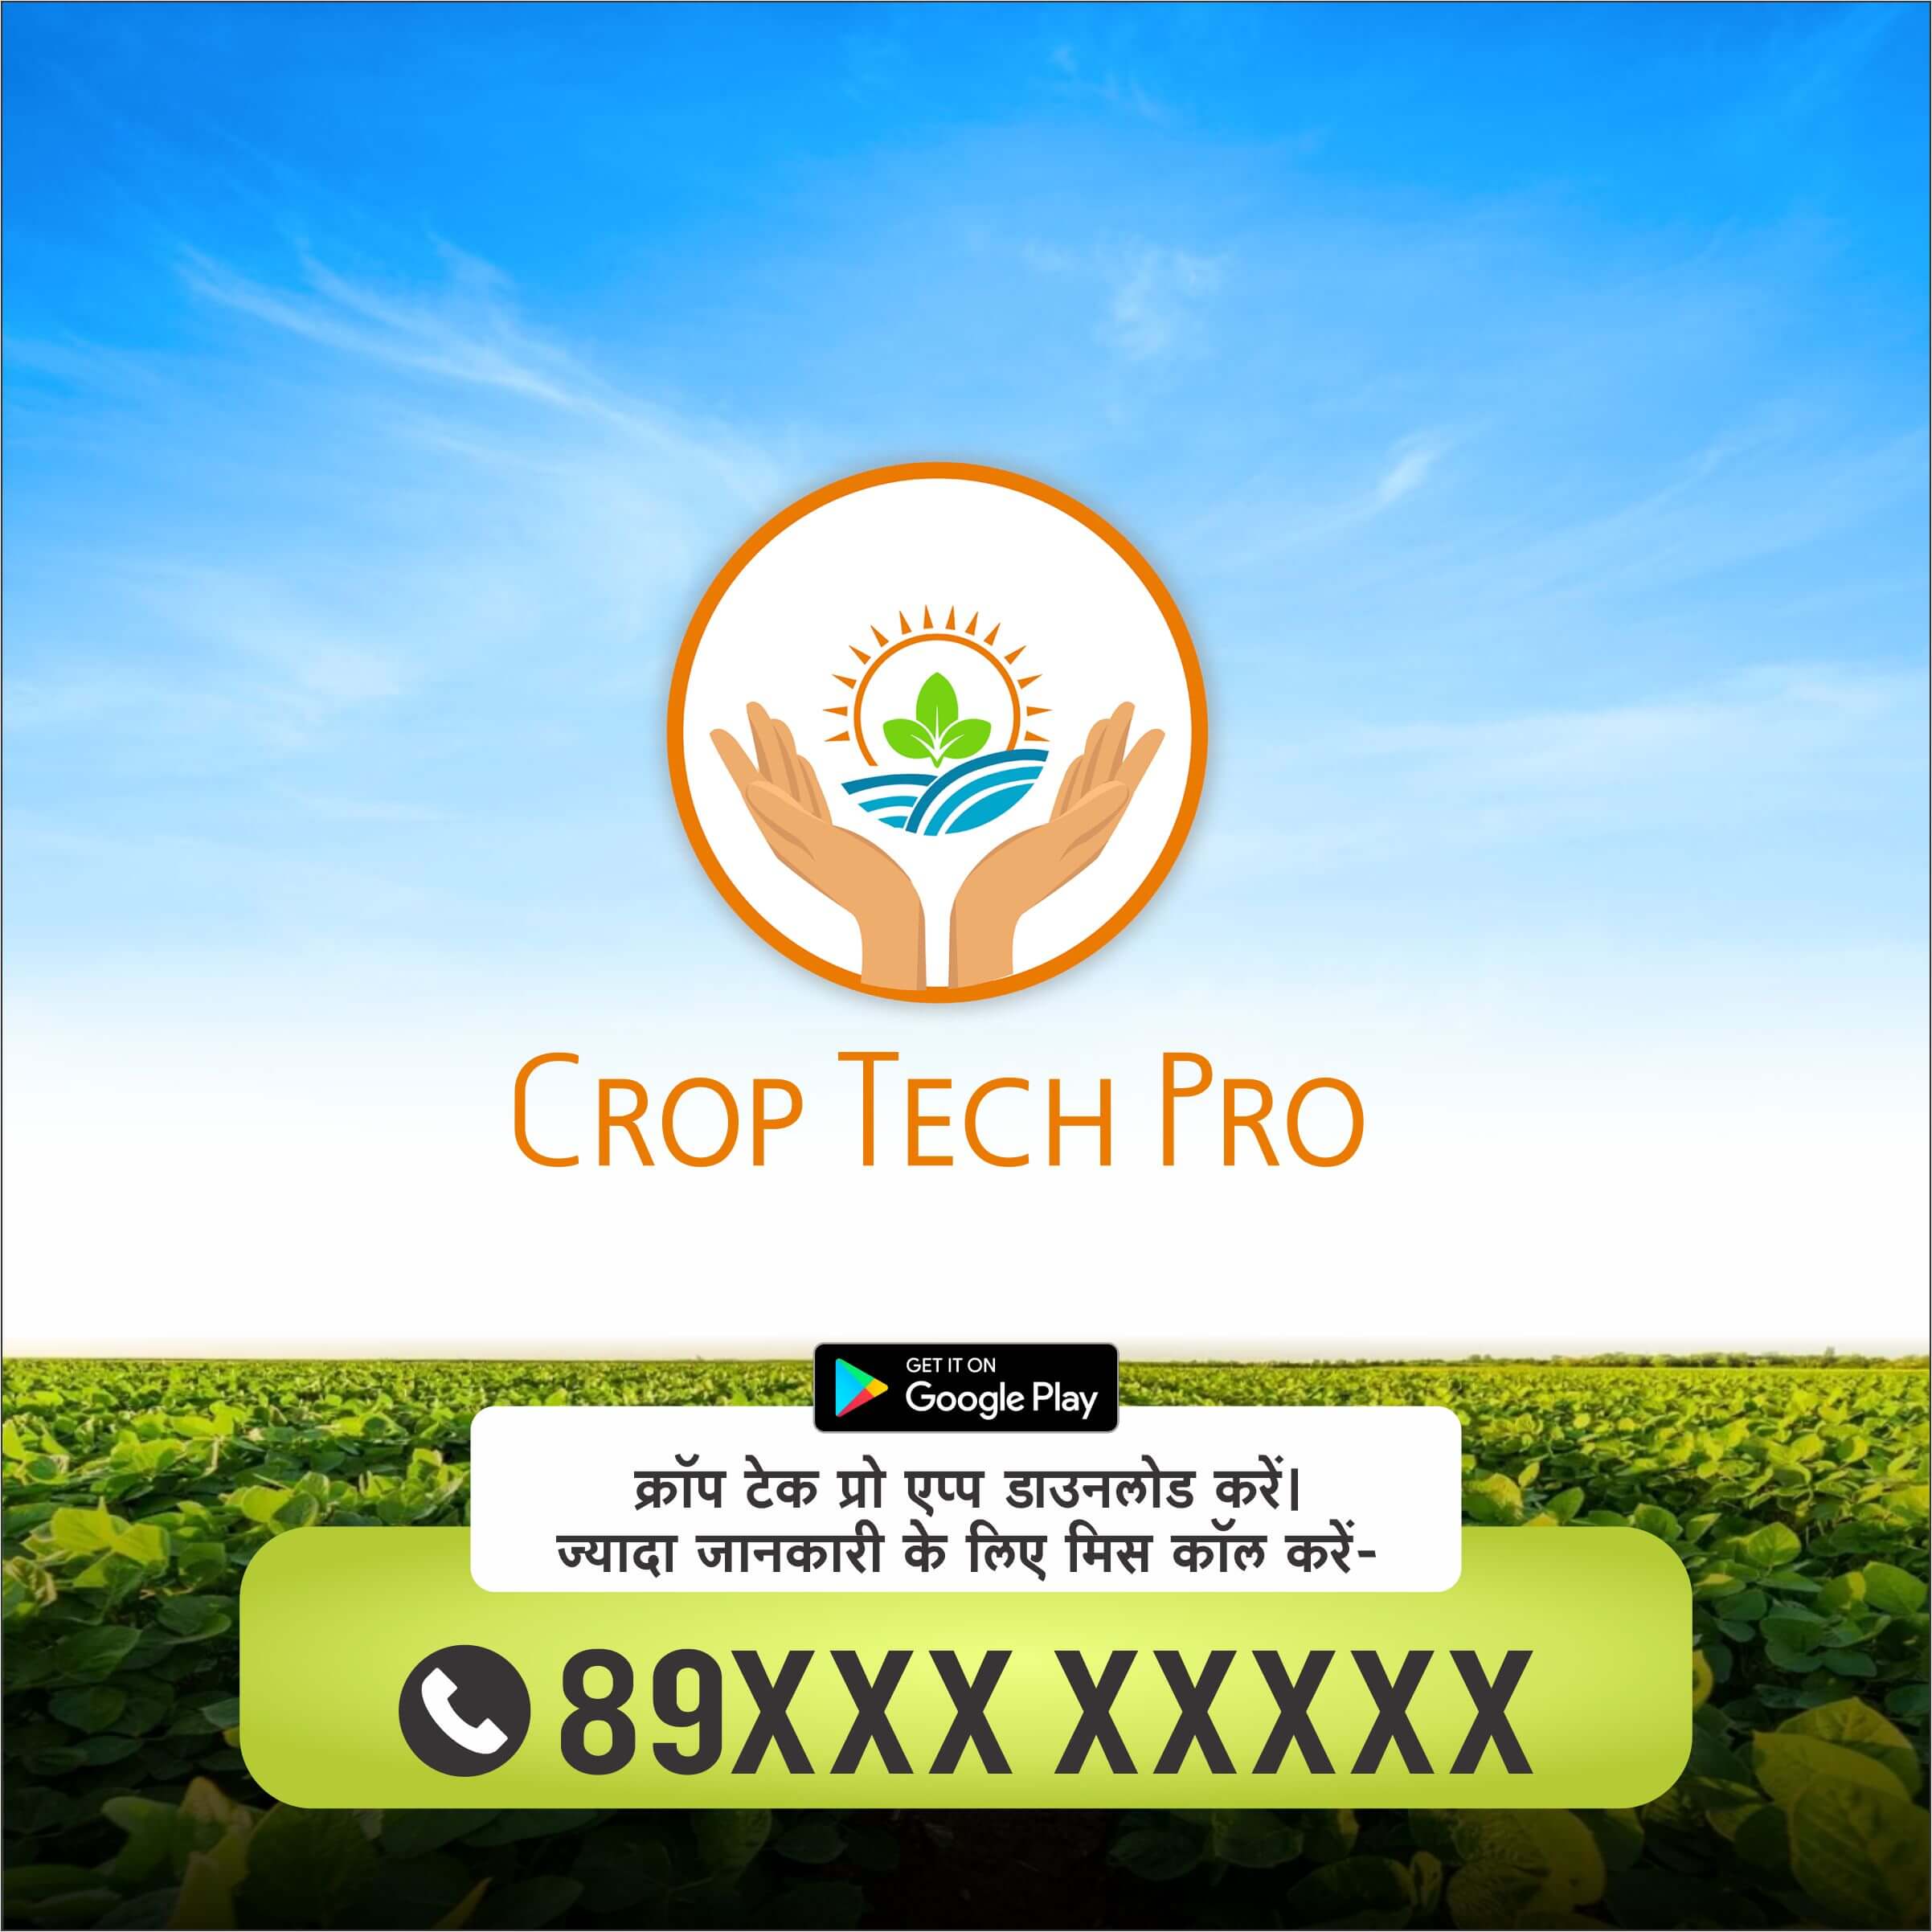 croptech image